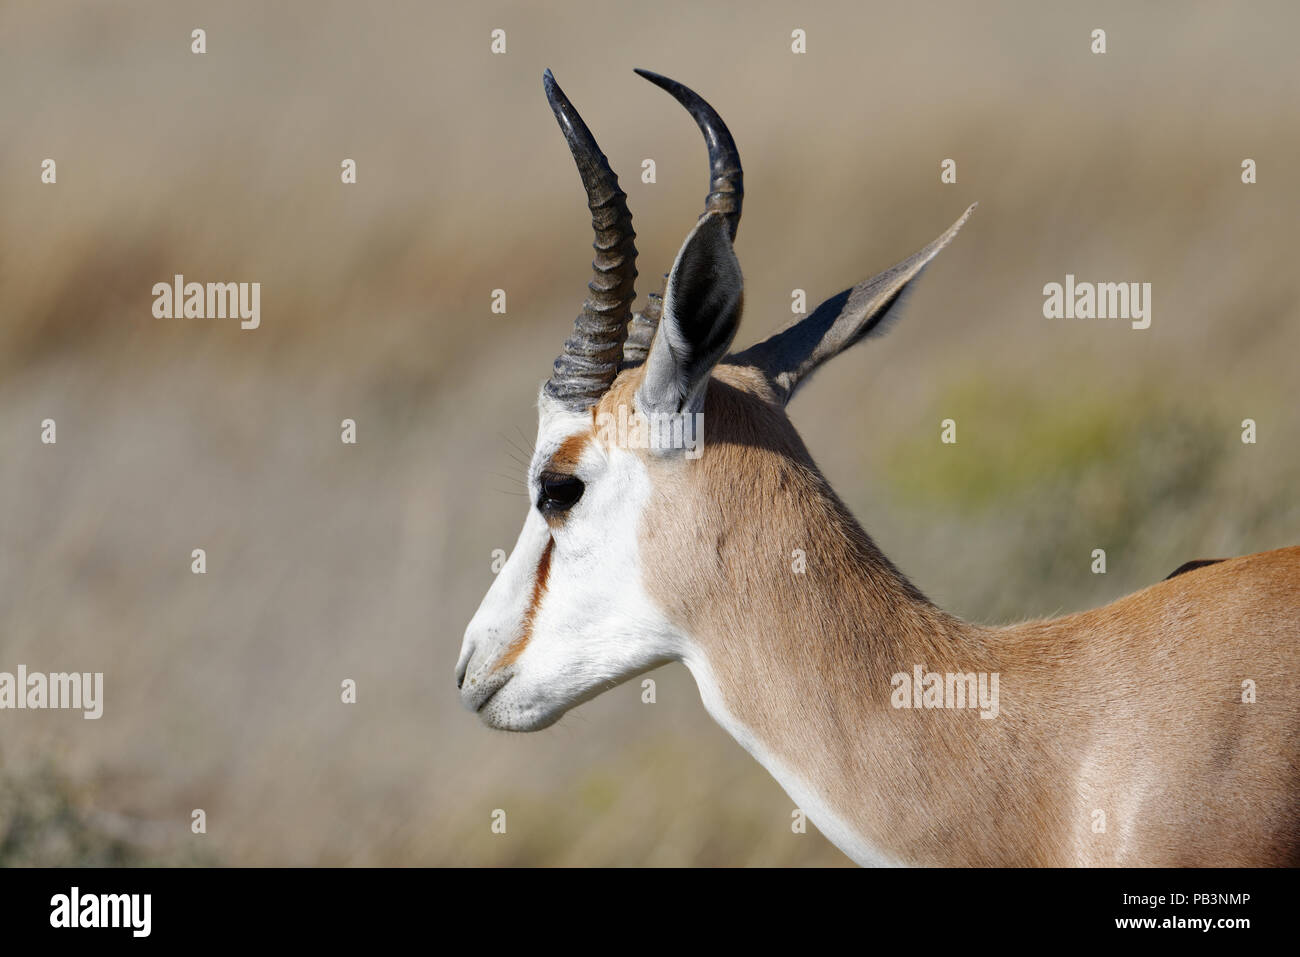 A springbok stands in the sun on the savanna in Etosha National Park, Namibia Stock Photo